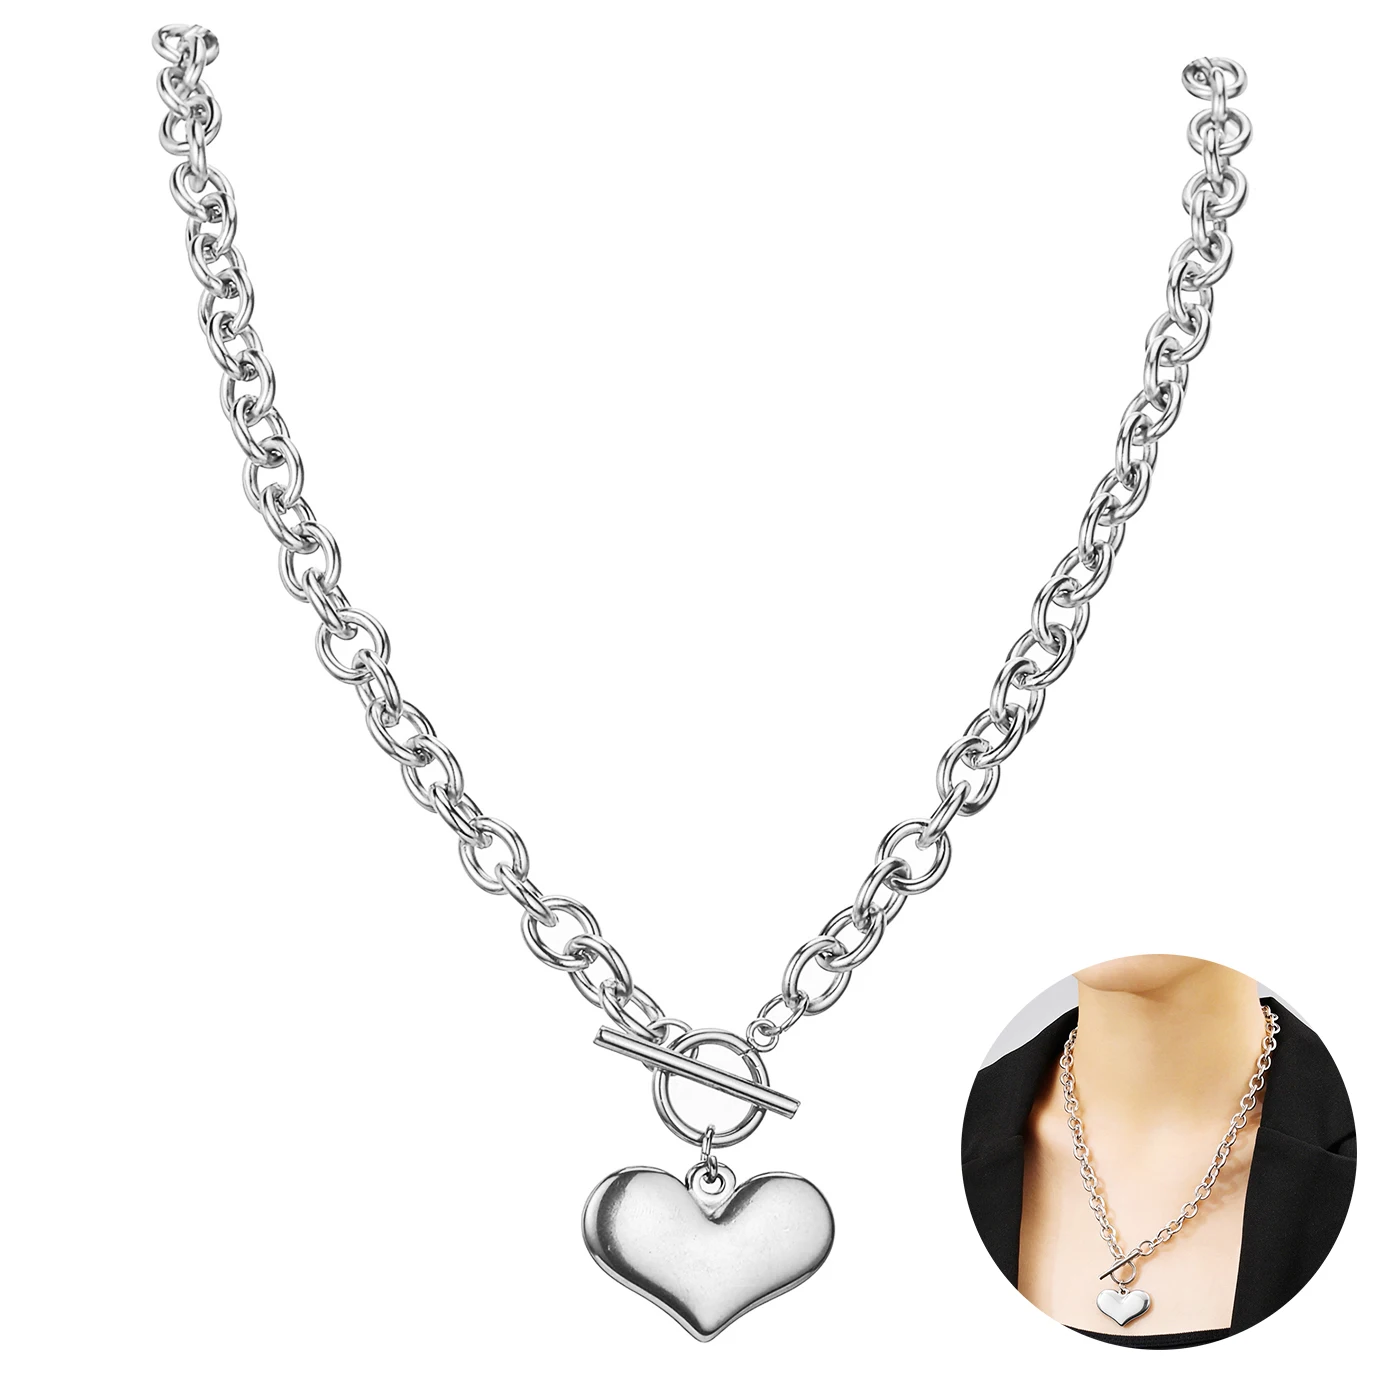 

High Quality New Trendy Love Heart Necklace for Women Clavicle Chain OT Clasp Punk Thick Chain Fashionable Jewelry Gift Hot Sale